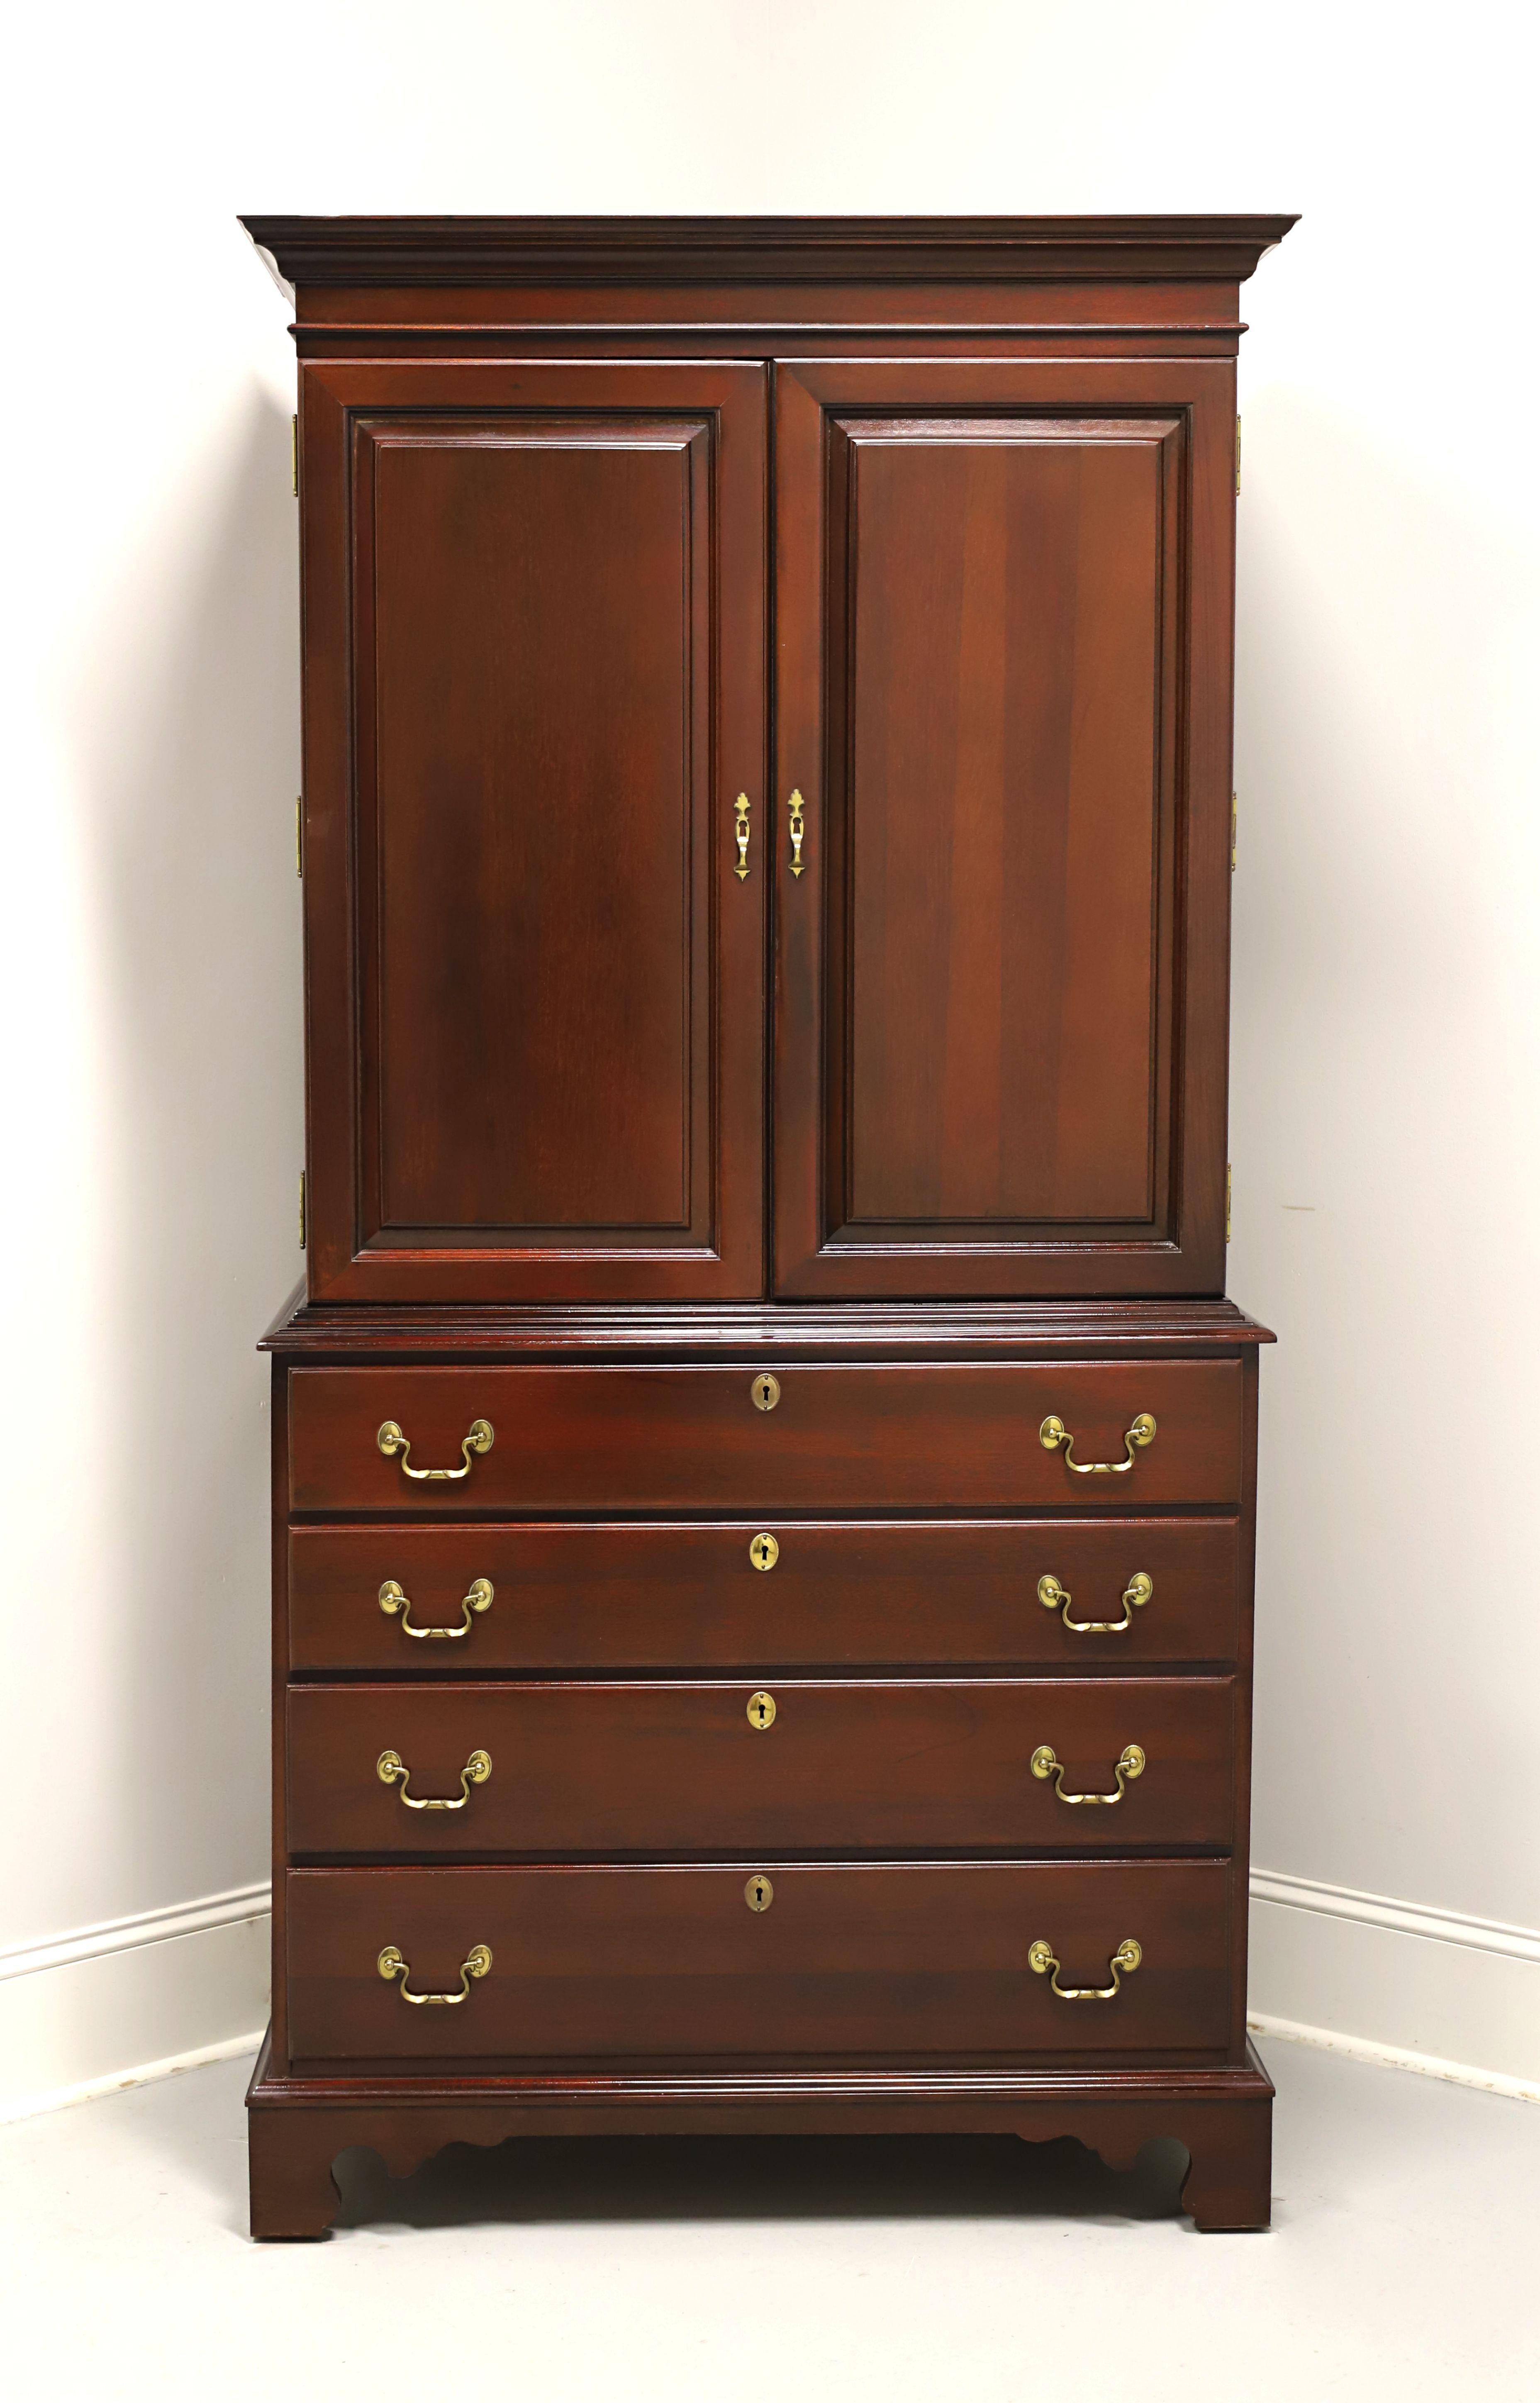 A Chippendale style armoire / linen press by Link-Taylor, from their Heirloom Gallery. Solid mahogany with brass hardware, crown moulding to top, ogee edges, and bracket feet. Upper area features two solid fold flat doors revealing an interior with